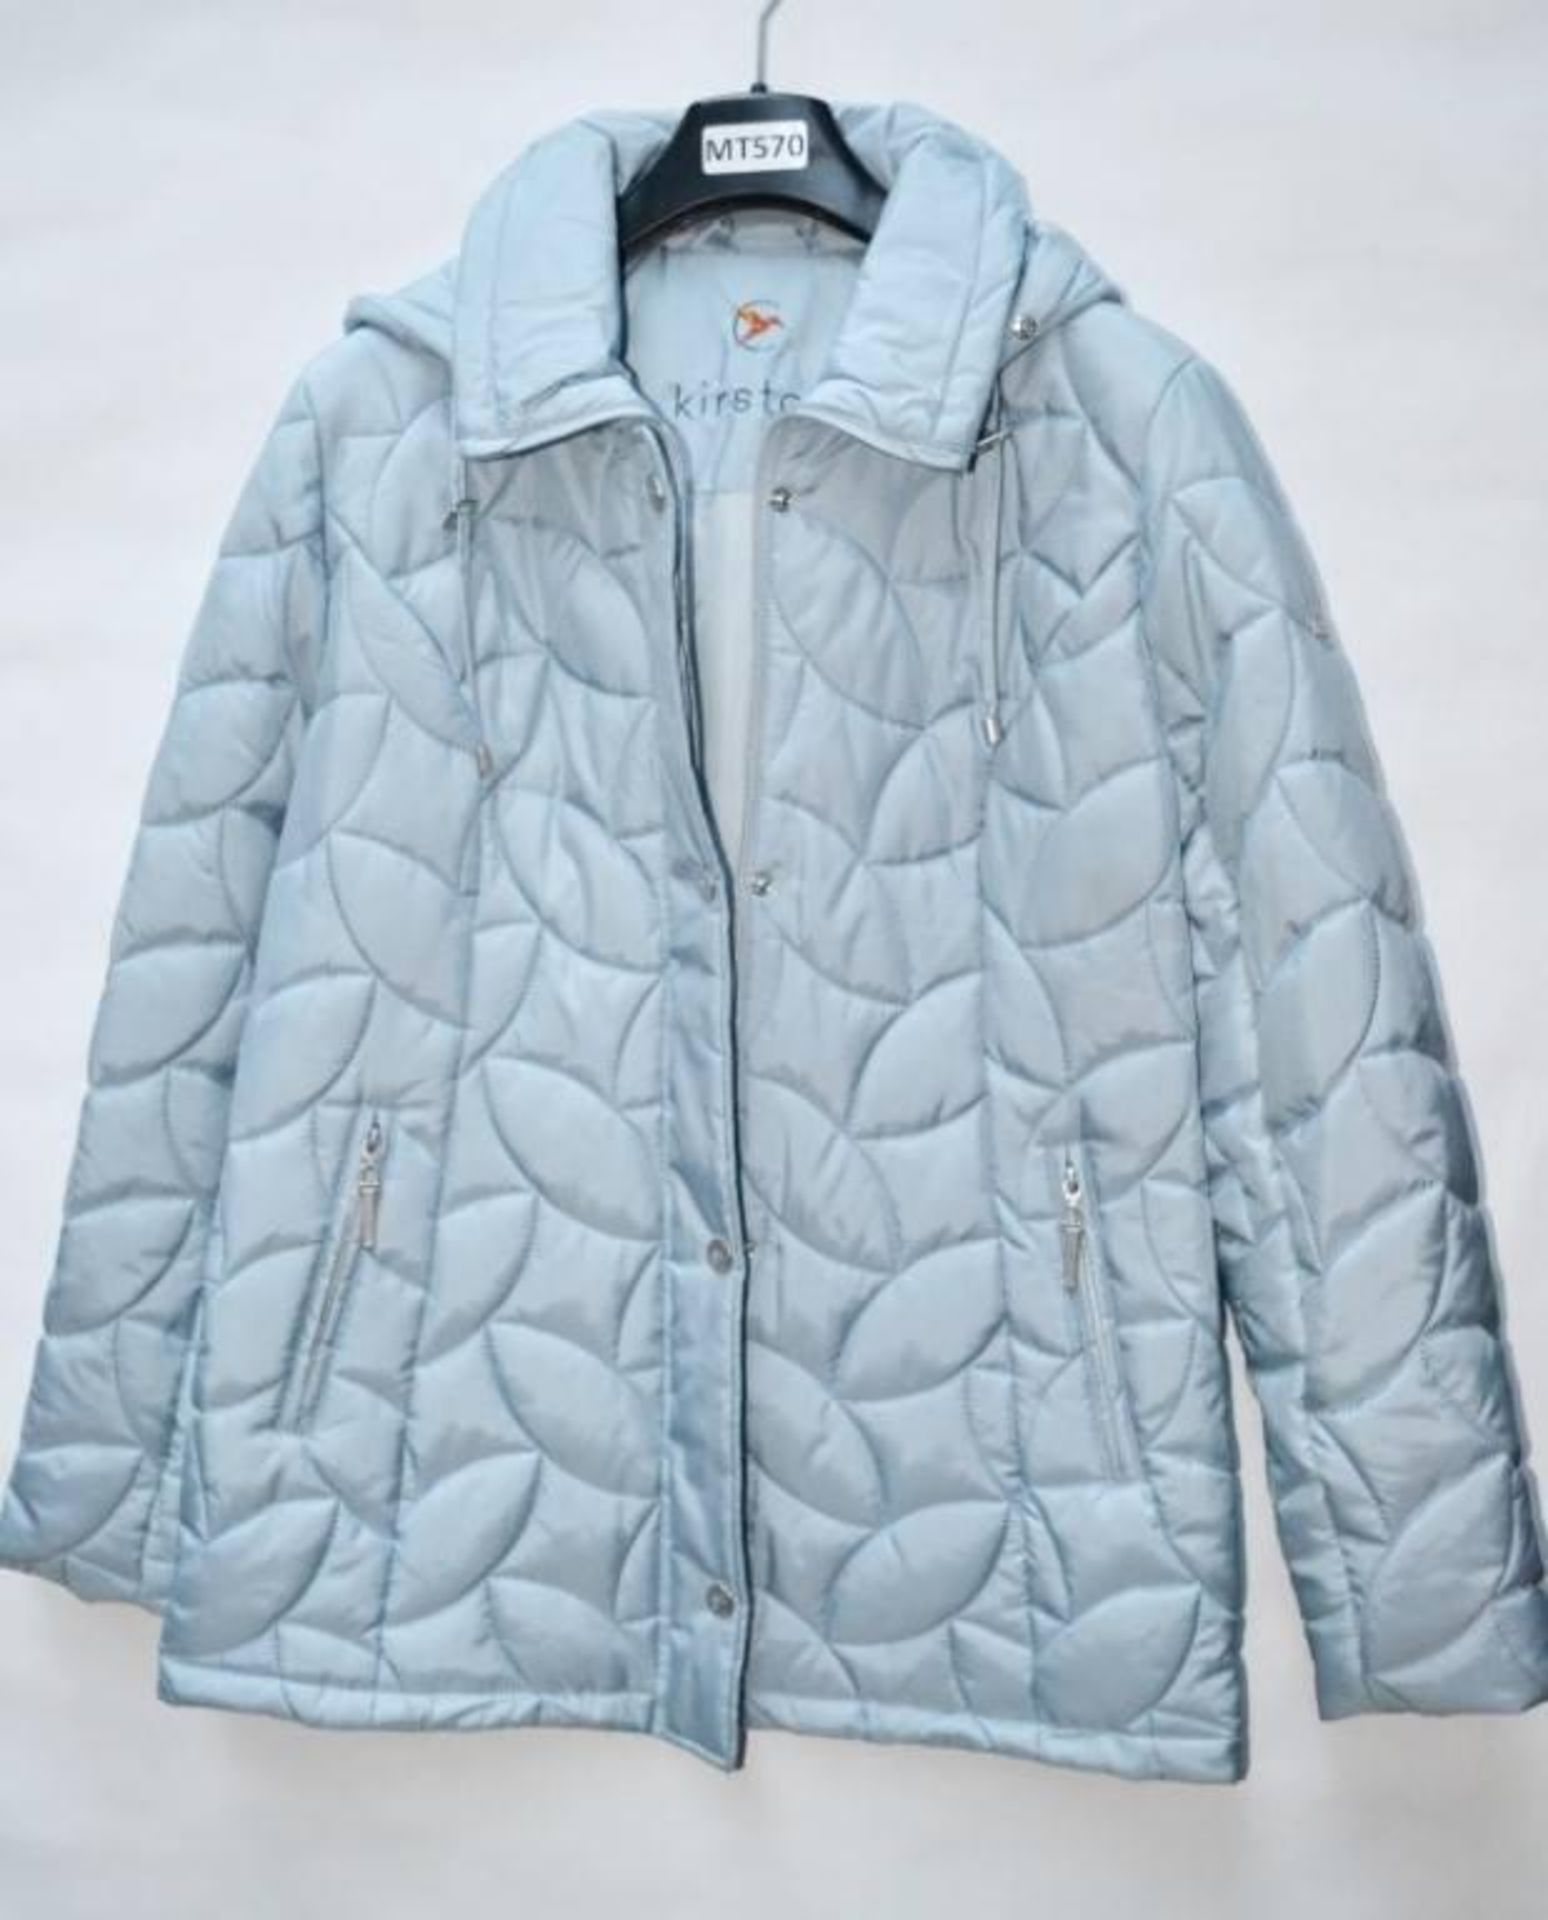 1 x Steilmann Kirsten Womens Quilted Winter Coat - Features Removable Hood - Size 12 - Colour: Pale